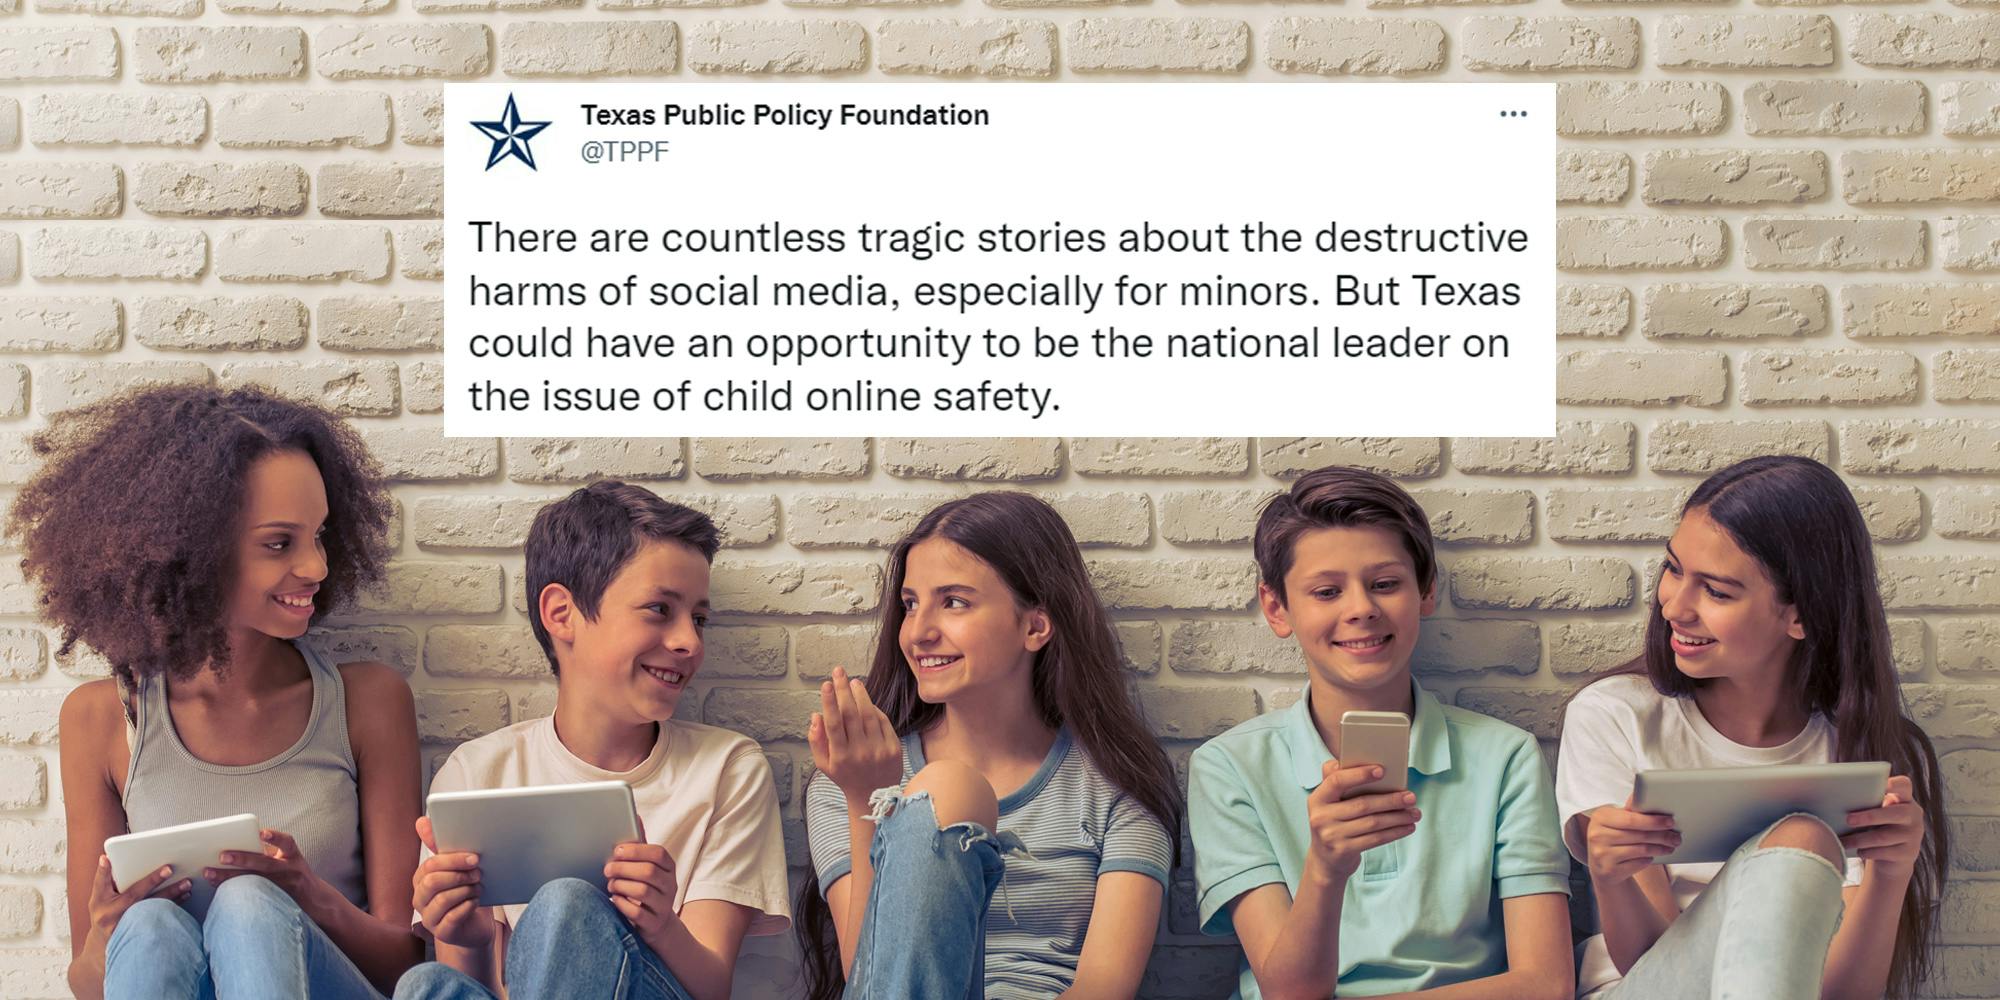 teen kids sitting against tan brick wall on phones and iPads with tweet by Texas Public Policy Foundation above caption "There are countless tragic stories about the destructive harms of social media, especially for minors. But Texas could have an opportunity to be the national leader on the issue of child safety online"